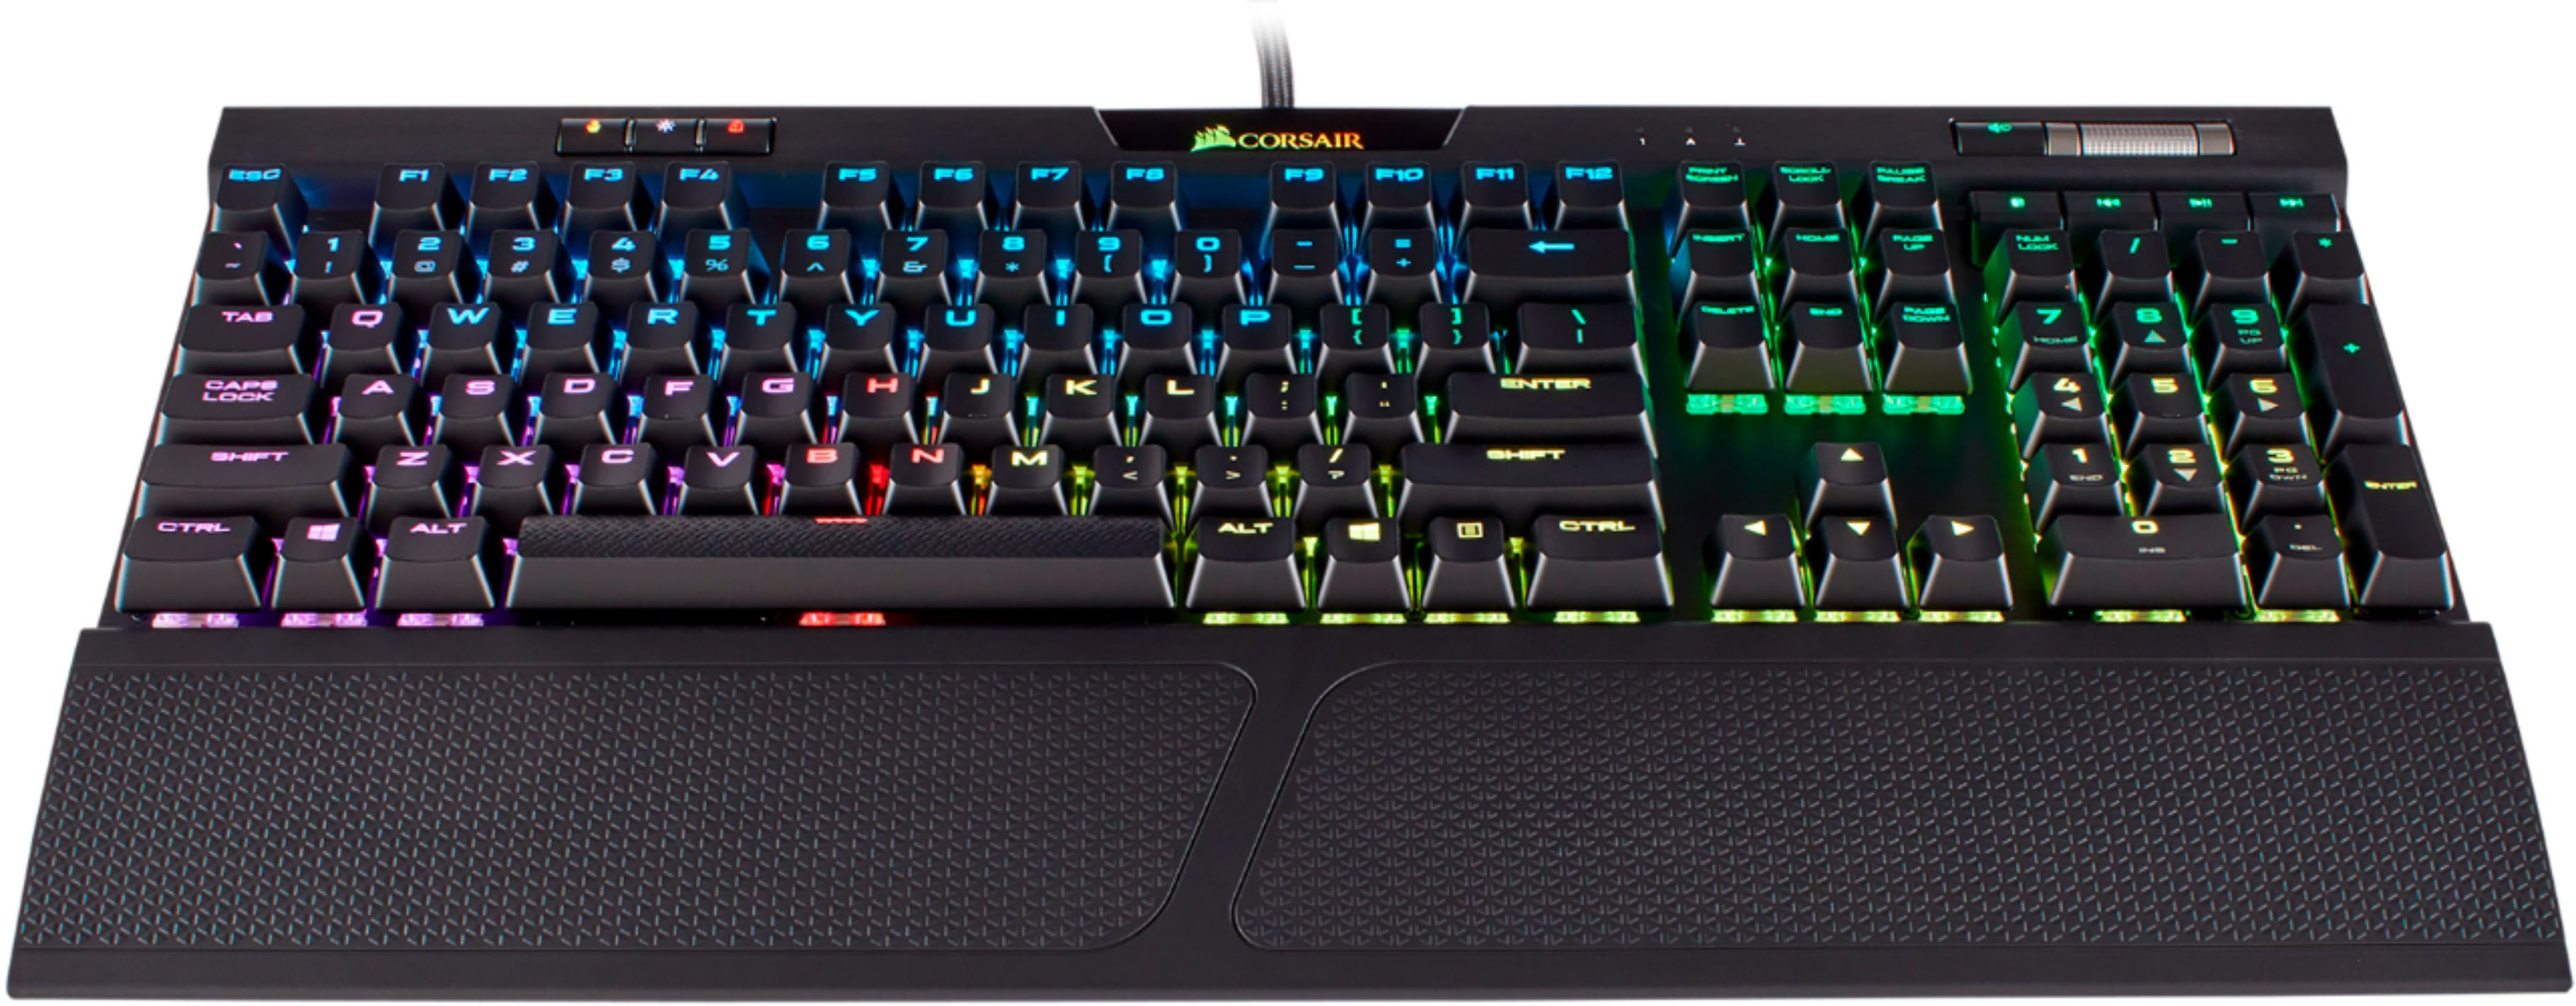 Best Buy: Gaming K70 RGB MK.2 Mechanical Wired MX Red Switch with Back Lighting Black CH-9109010-NA